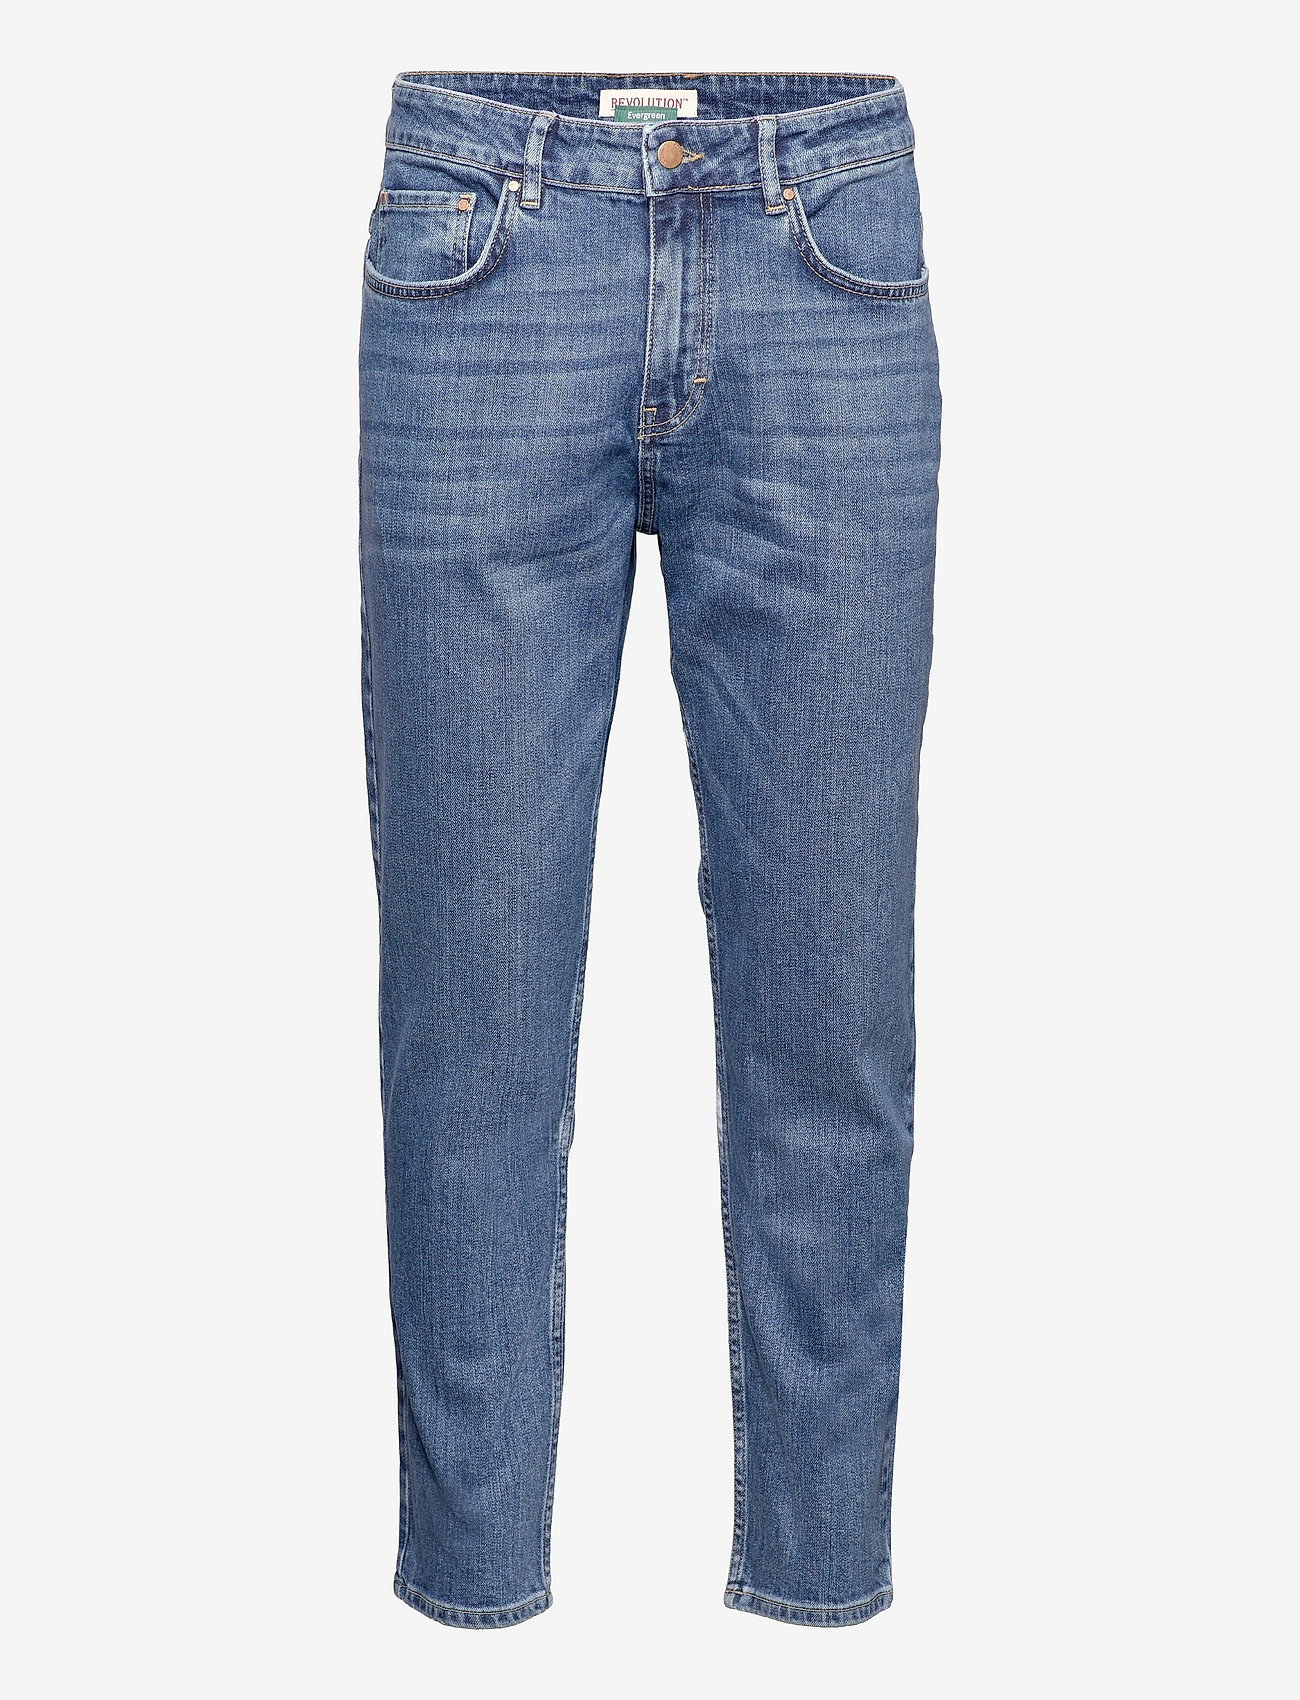 Revolution - Loose fit jeans - relaxed jeans - blue - 0